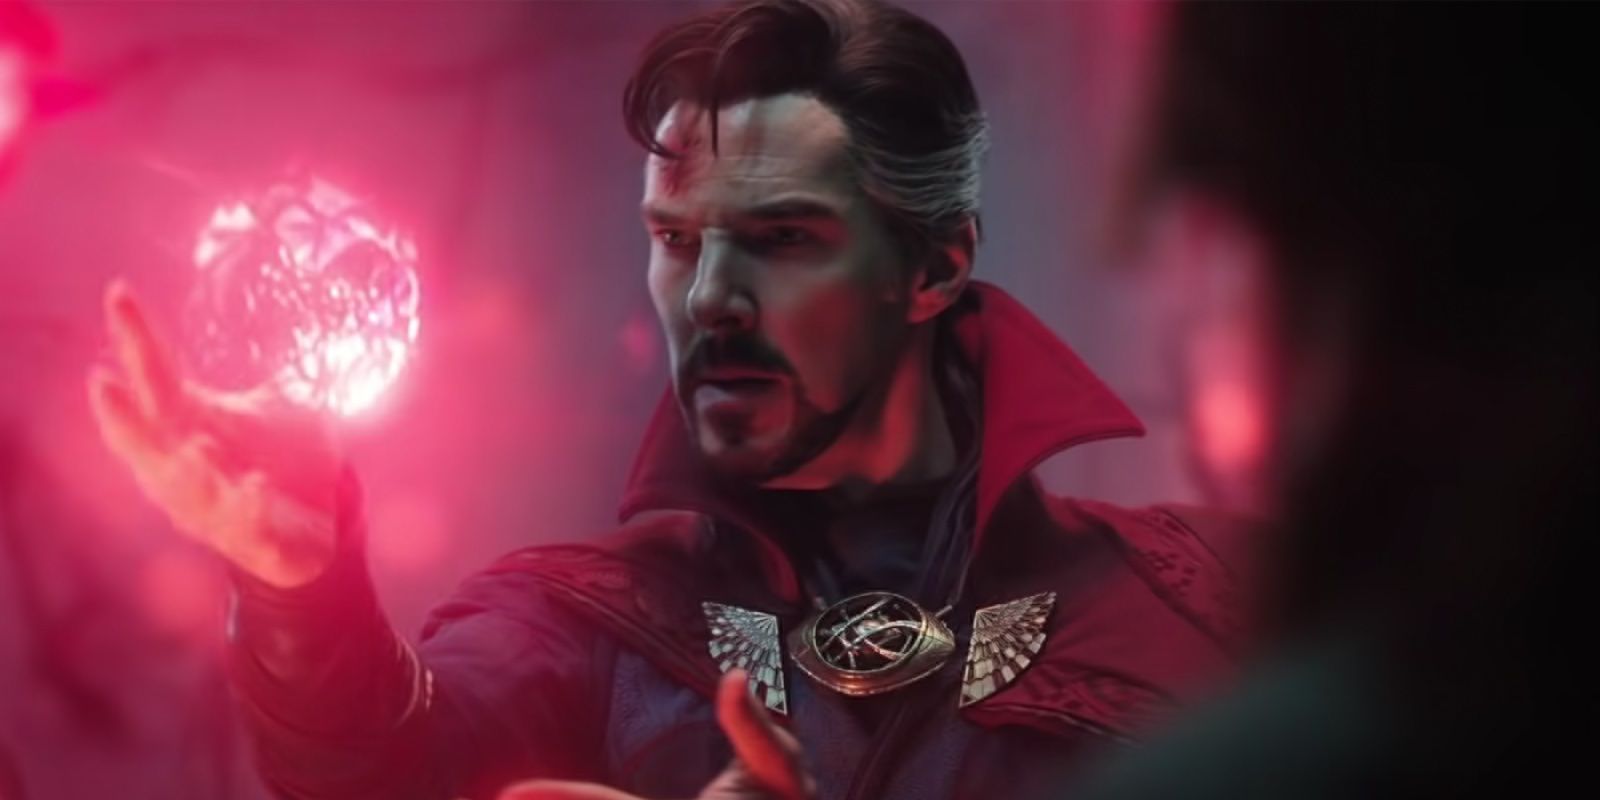 Doctor Strange emitting his powers in Doctor Strange in the Multiverse of Madness